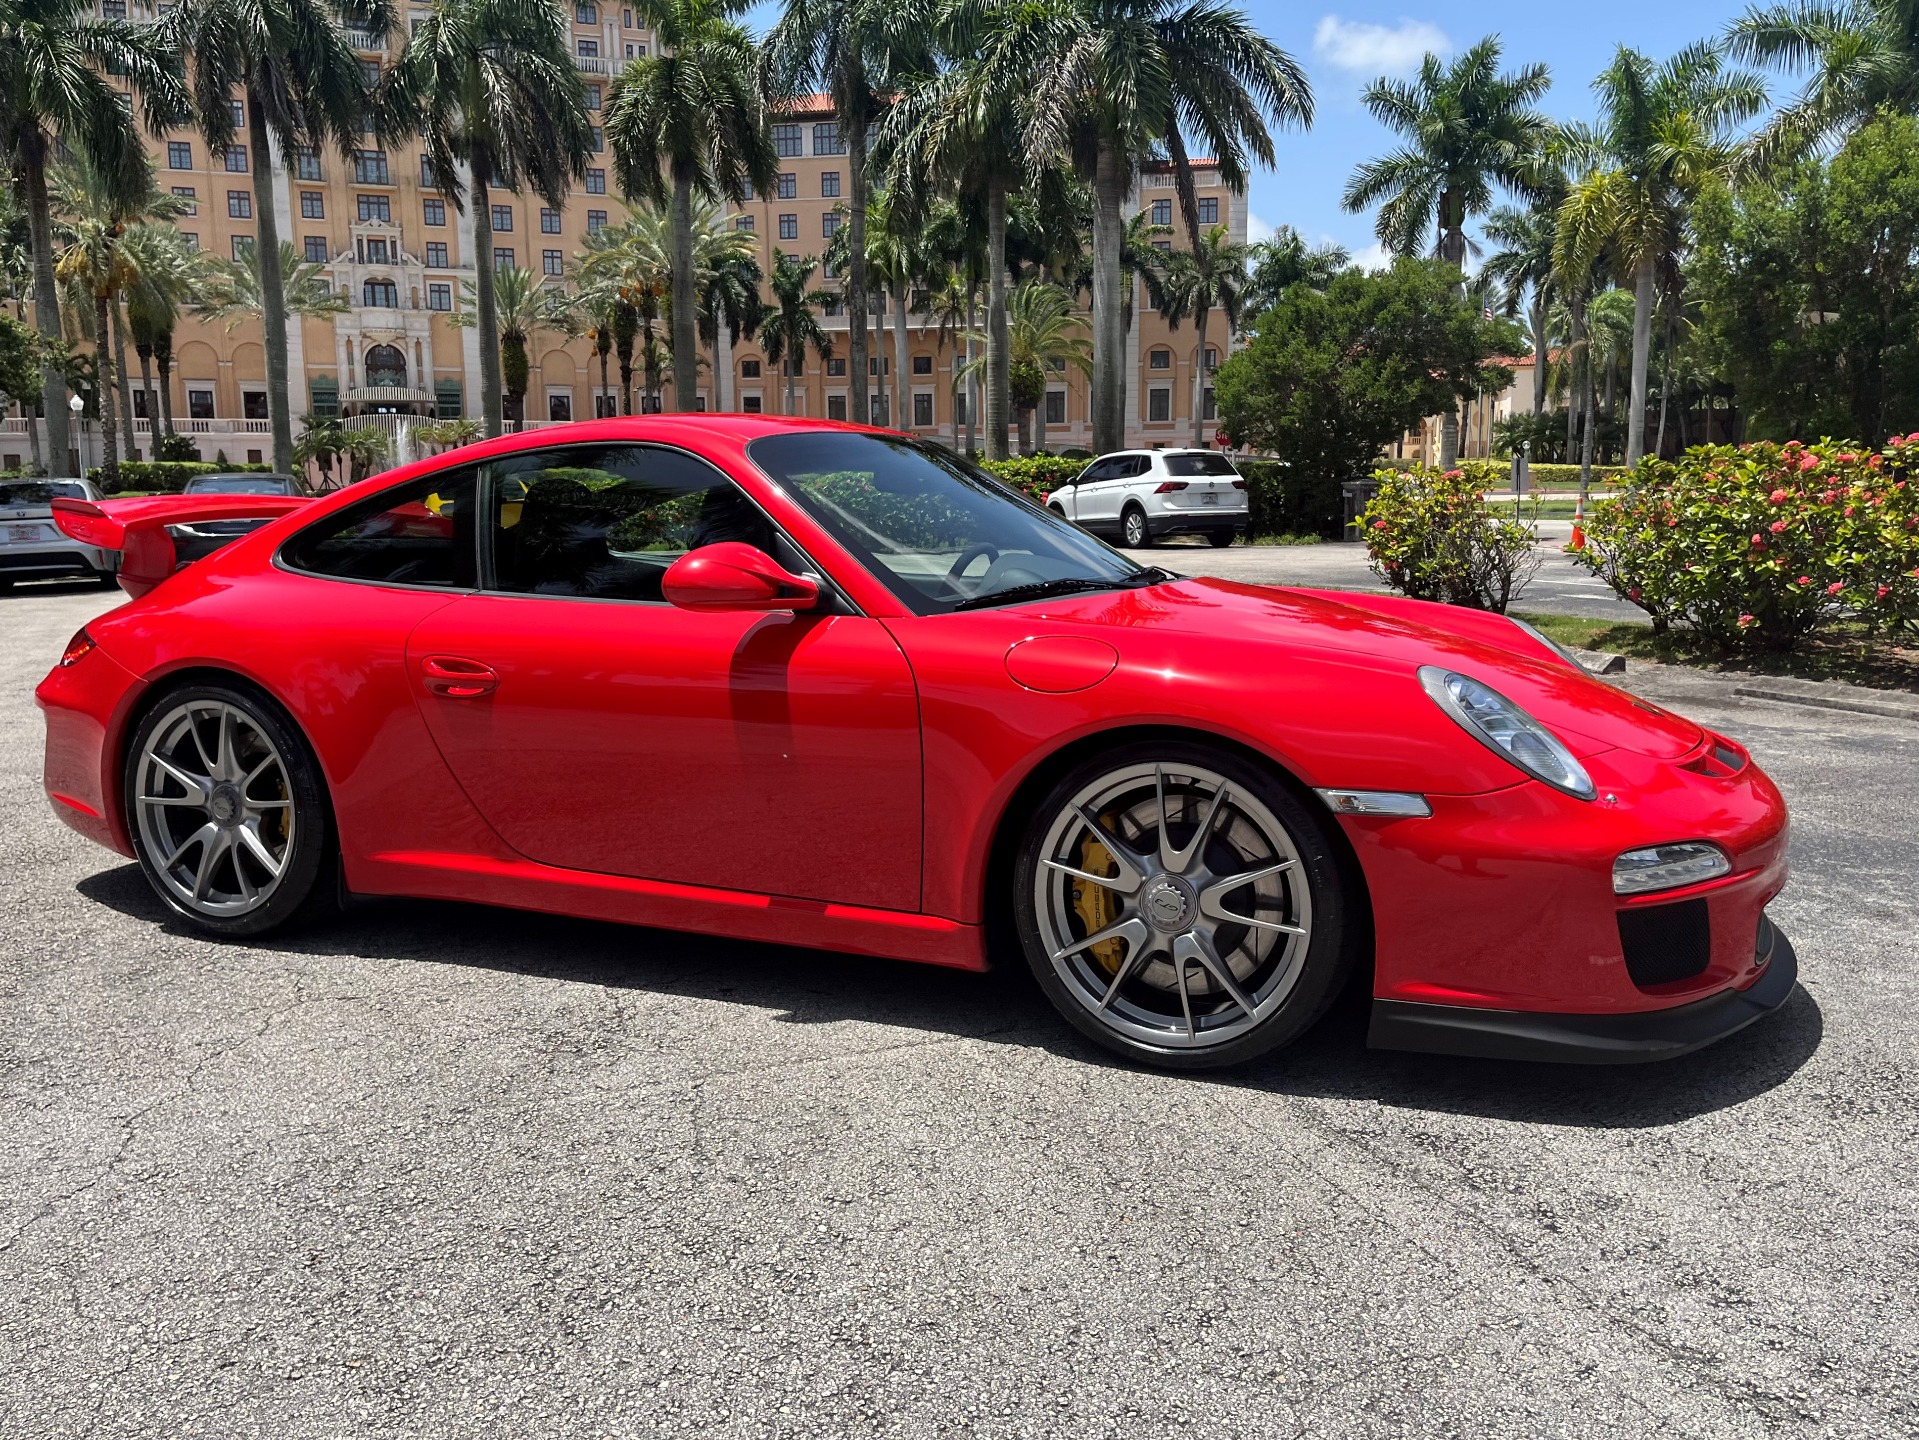 Used 2010 Porsche 911 GT3 for sale Sold at The Gables Sports Cars in Miami FL 33146 4